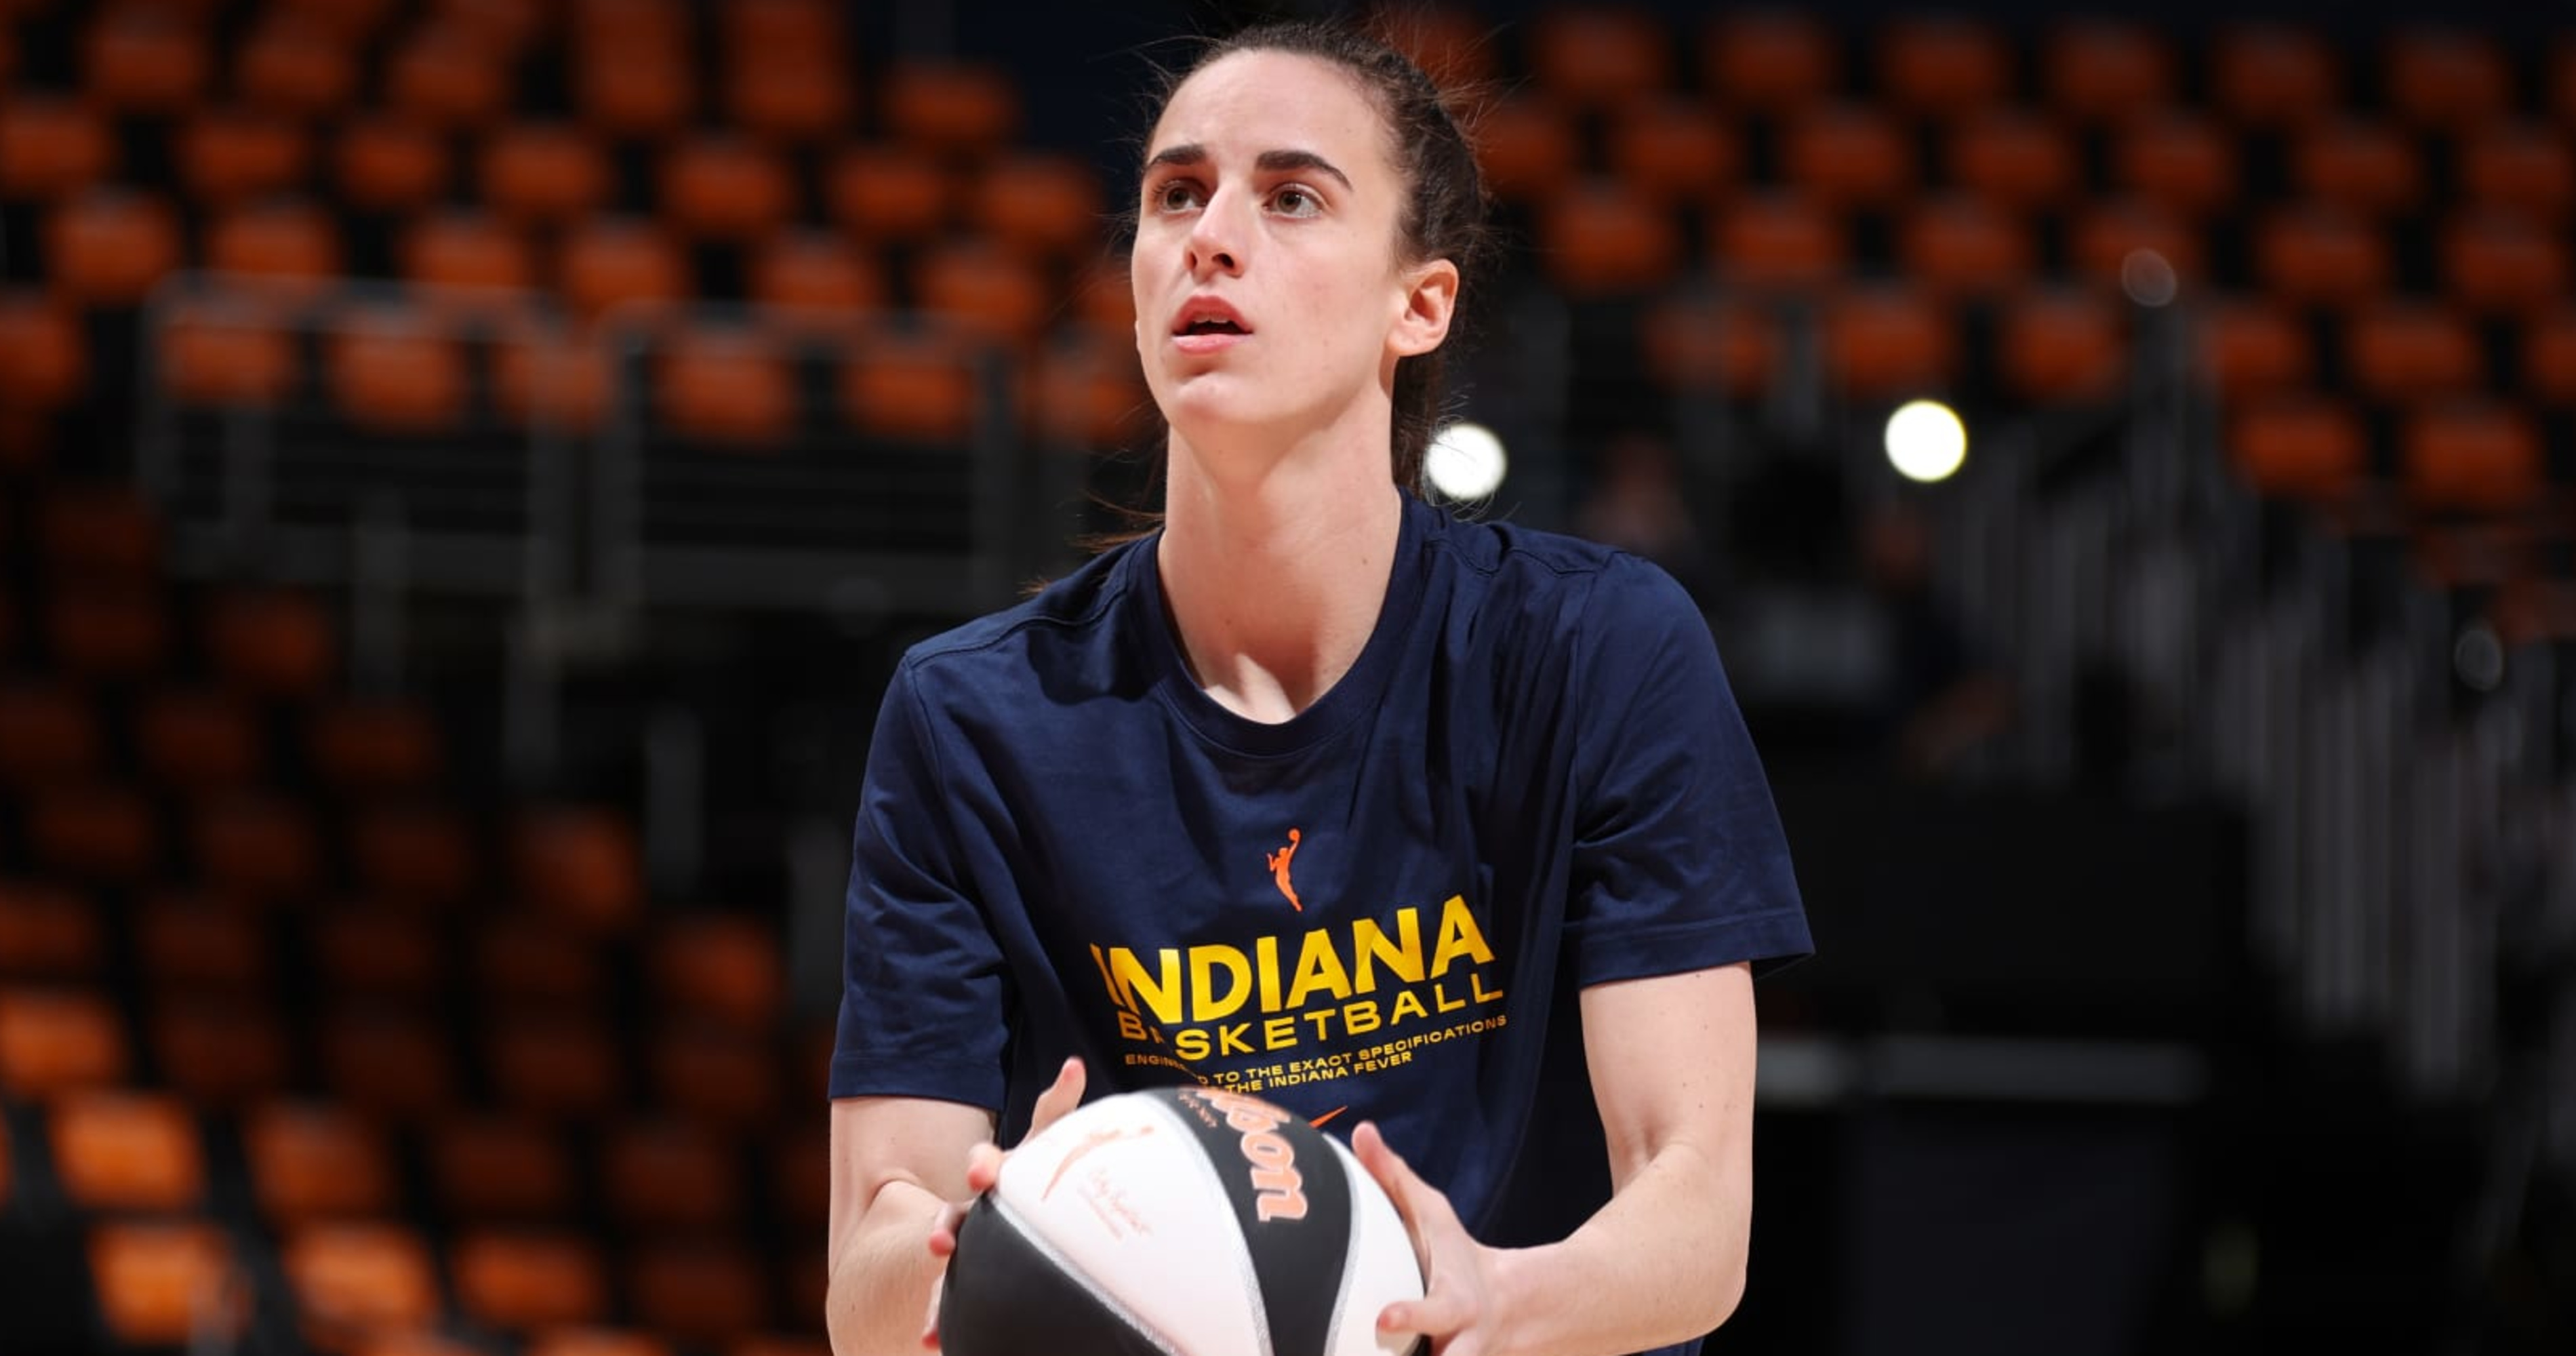 Caitlin Clark Rumors: Fan Backlash to Potential Playing Time Led to USA Olympic Snub